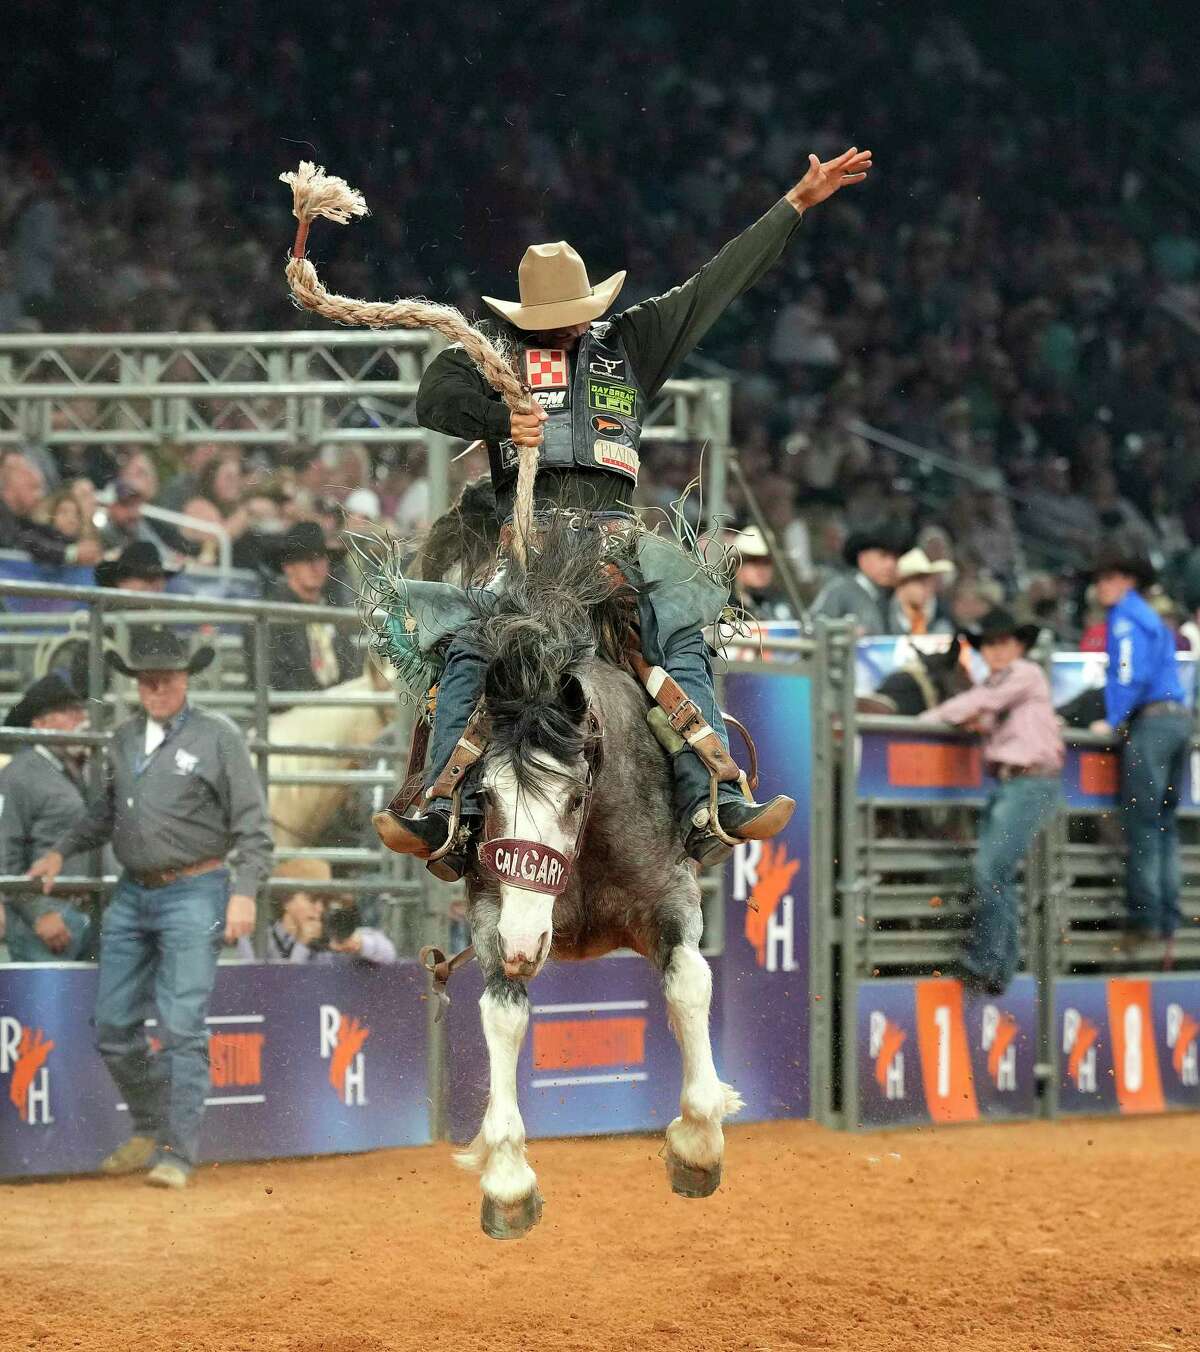 Isaac Diaz rides Dandy Delight to take first place in the saddle bronc riding competition during Semifinal 1 during Rodeo Houston at the Houston Livestock Show and Rodeo at NRG Stadium on Wednesday, March 15, 2023 in Houston.